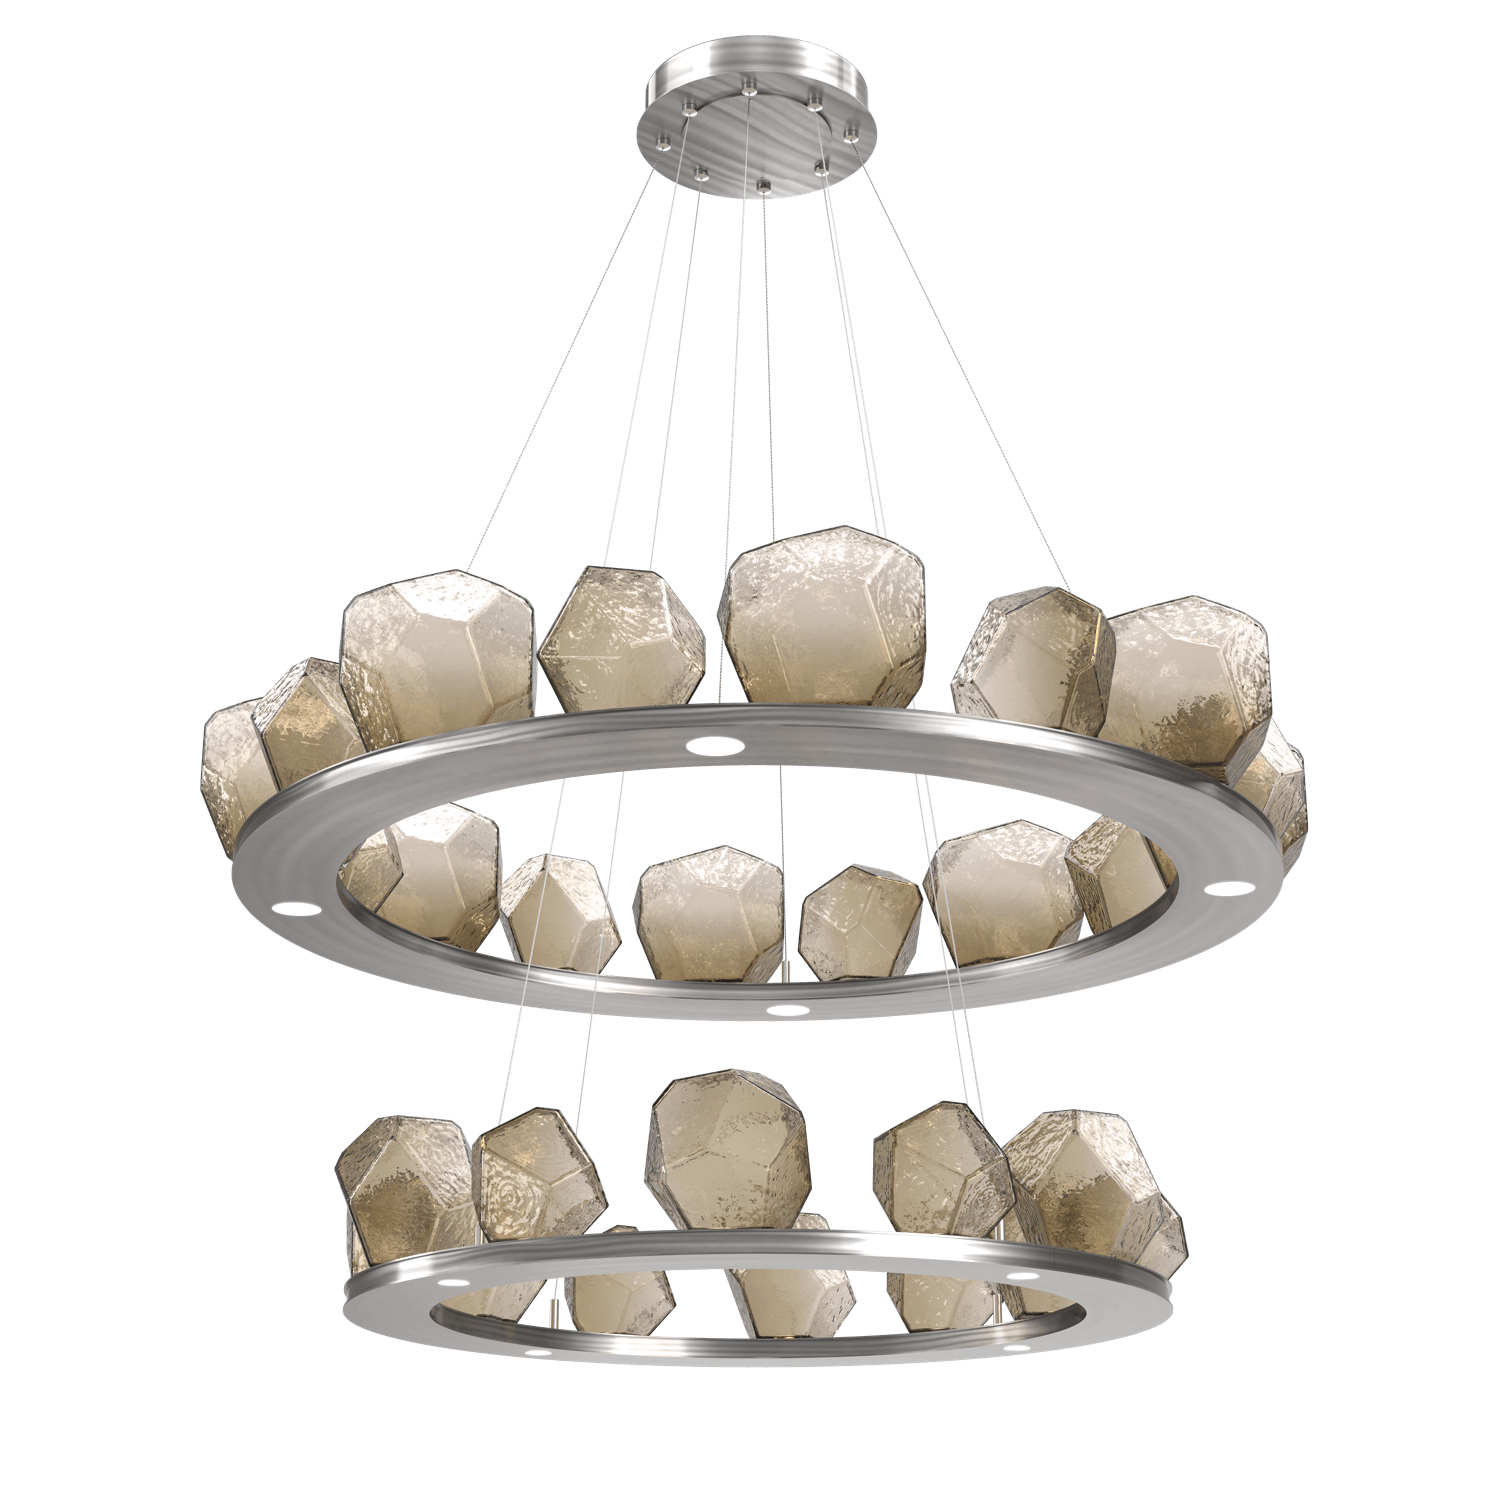 CHB0039-2B-SN-B-Hammerton-Studio-Gem-48-inch-two-tier-ring-chandelier-with-satin-nickel-finish-and-bronze-blown-glass-shades-and-LED-lamping